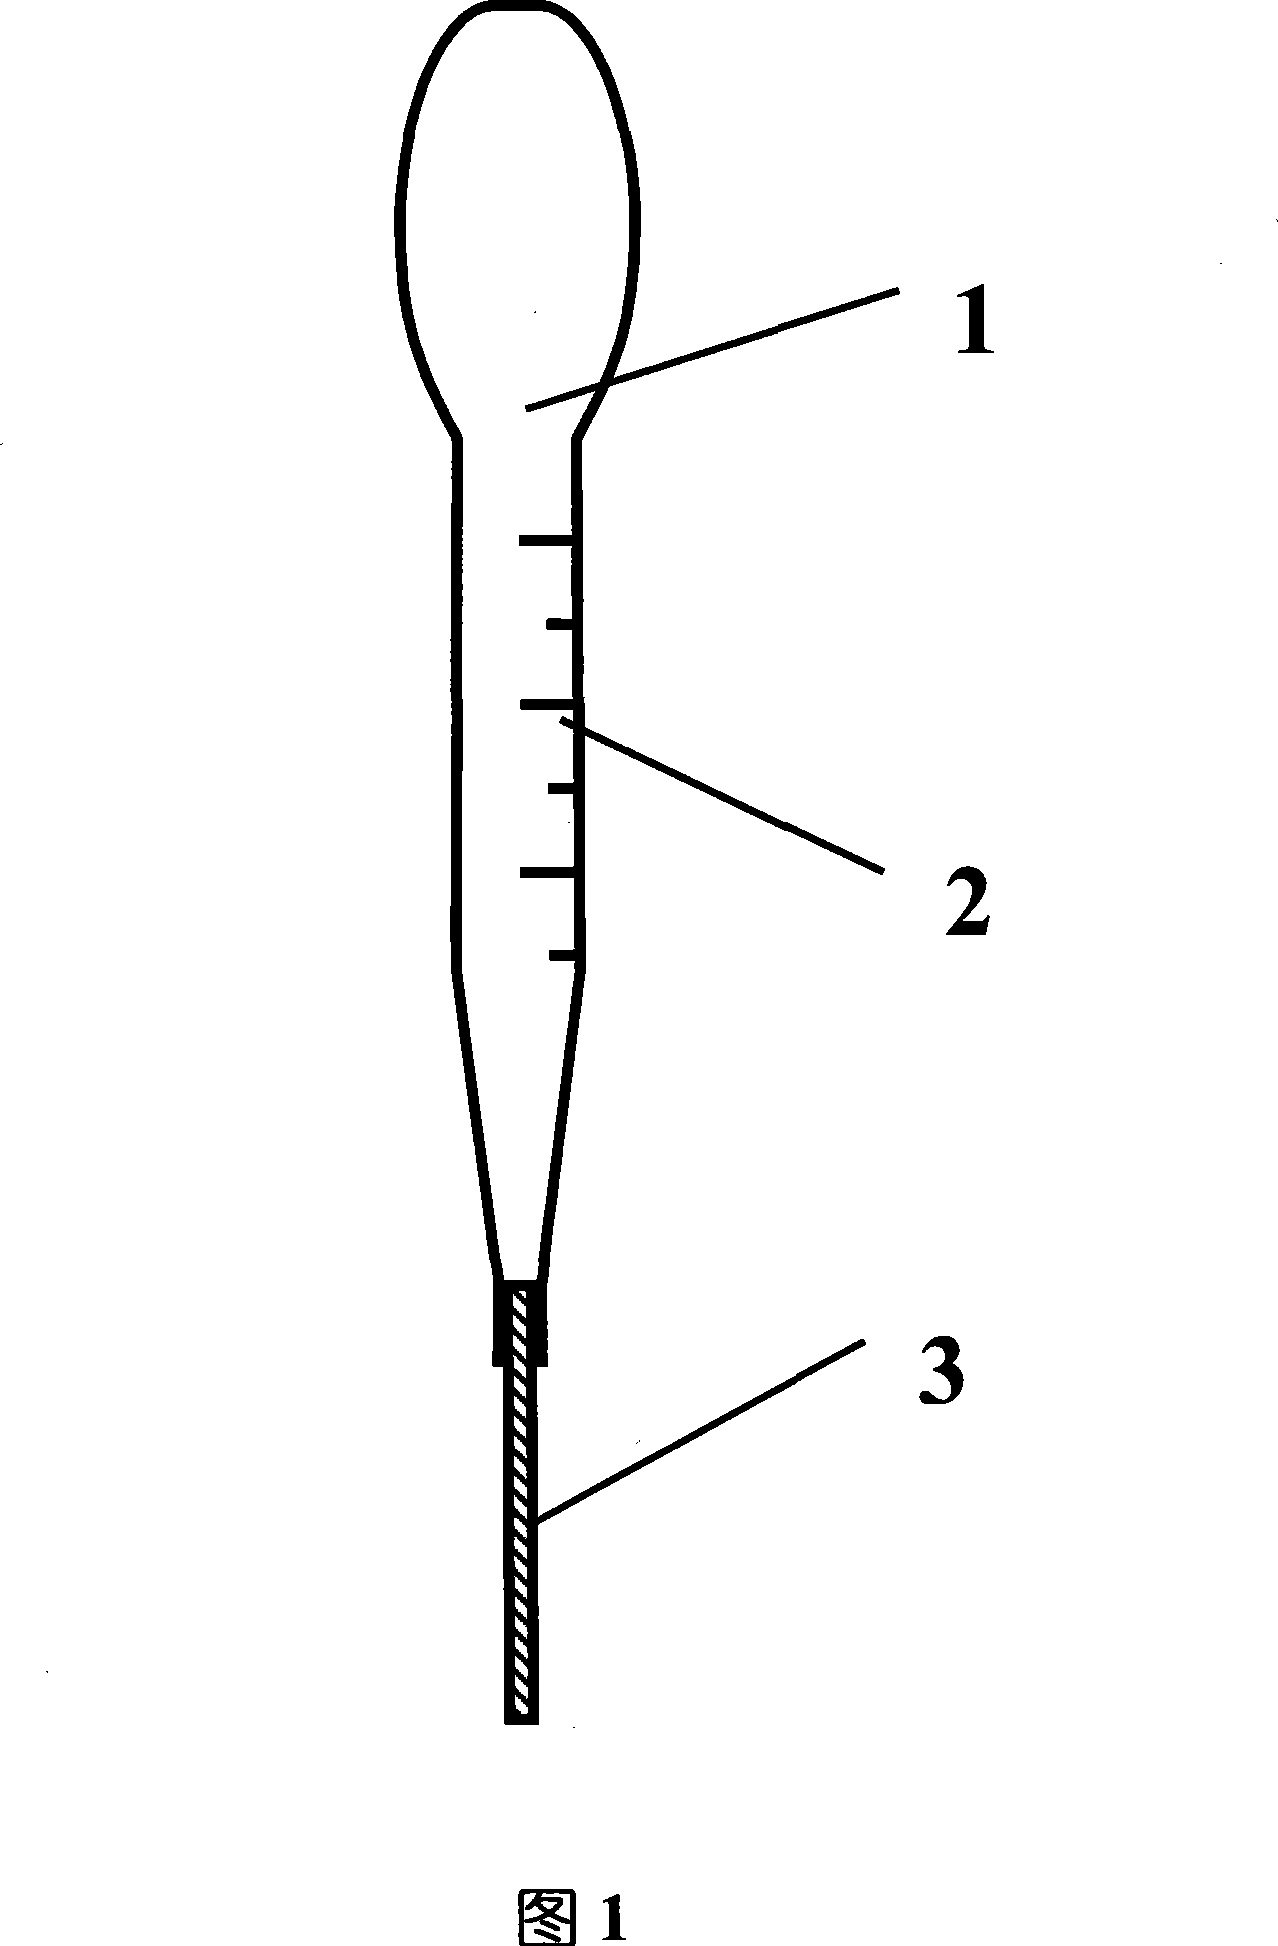 Liquid droplet volume invariable microtitration capillary